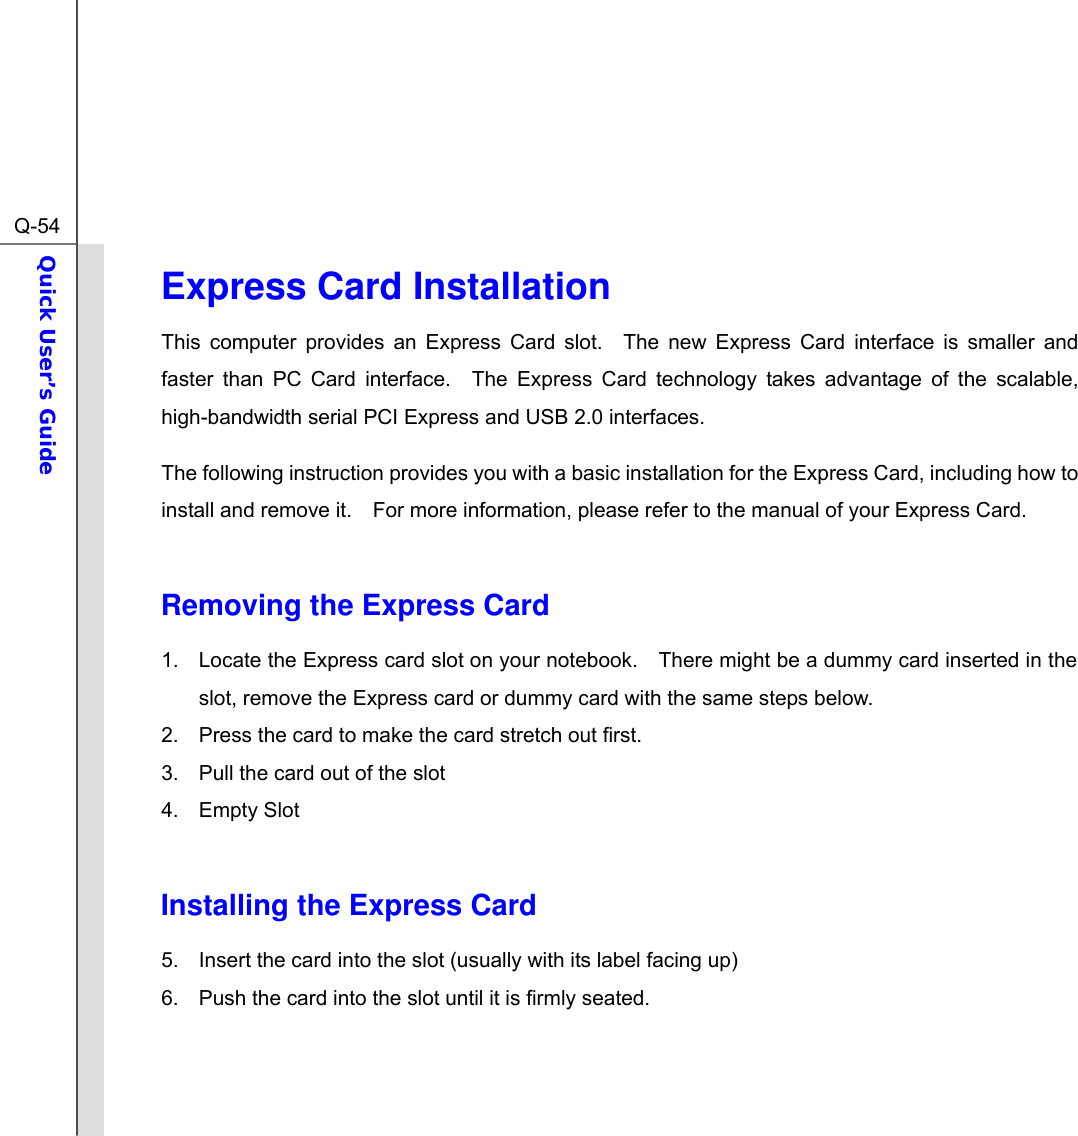  Q-54Quick User’s Guide  Express Card Installation This computer provides an Express Card slot.  The new Express Card interface is smaller and faster than PC Card interface.  The Express Card technology takes advantage of the scalable, high-bandwidth serial PCI Express and USB 2.0 interfaces.   The following instruction provides you with a basic installation for the Express Card, including how to install and remove it.    For more information, please refer to the manual of your Express Card.  Removing the Express Card   1.  Locate the Express card slot on your notebook.    There might be a dummy card inserted in the slot, remove the Express card or dummy card with the same steps below. 2.  Press the card to make the card stretch out first. 3.  Pull the card out of the slot 4. Empty Slot  Installing the Express Card 5.  Insert the card into the slot (usually with its label facing up)   6.  Push the card into the slot until it is firmly seated.    